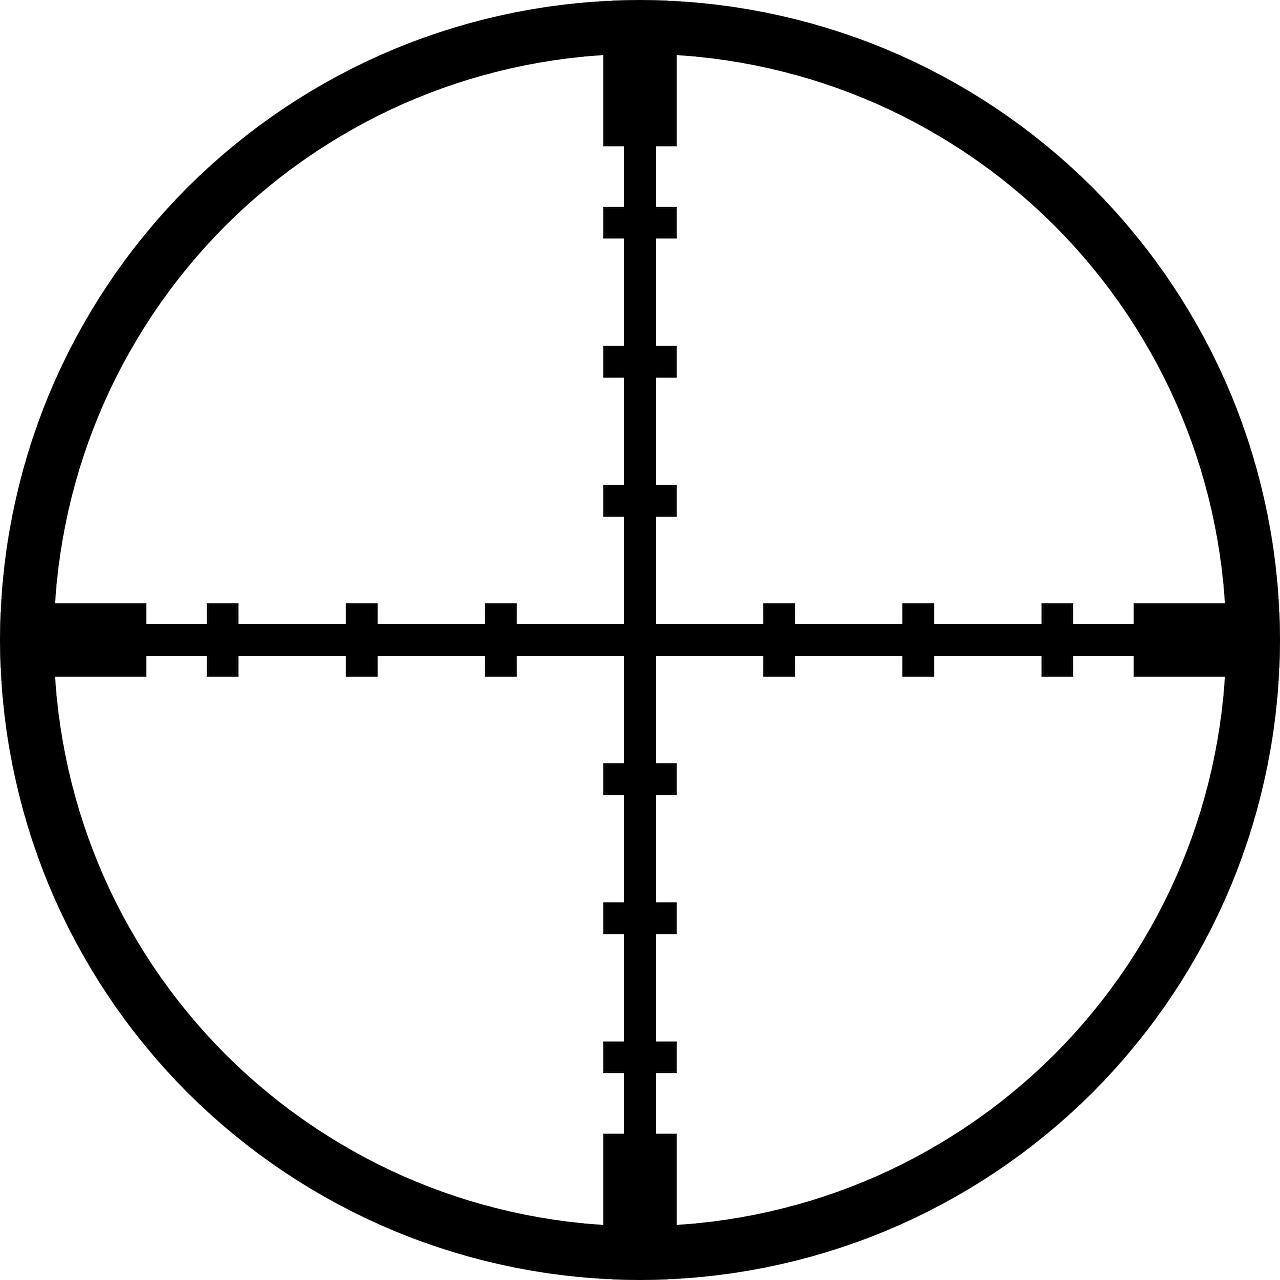 Image of a typical scope reticle 